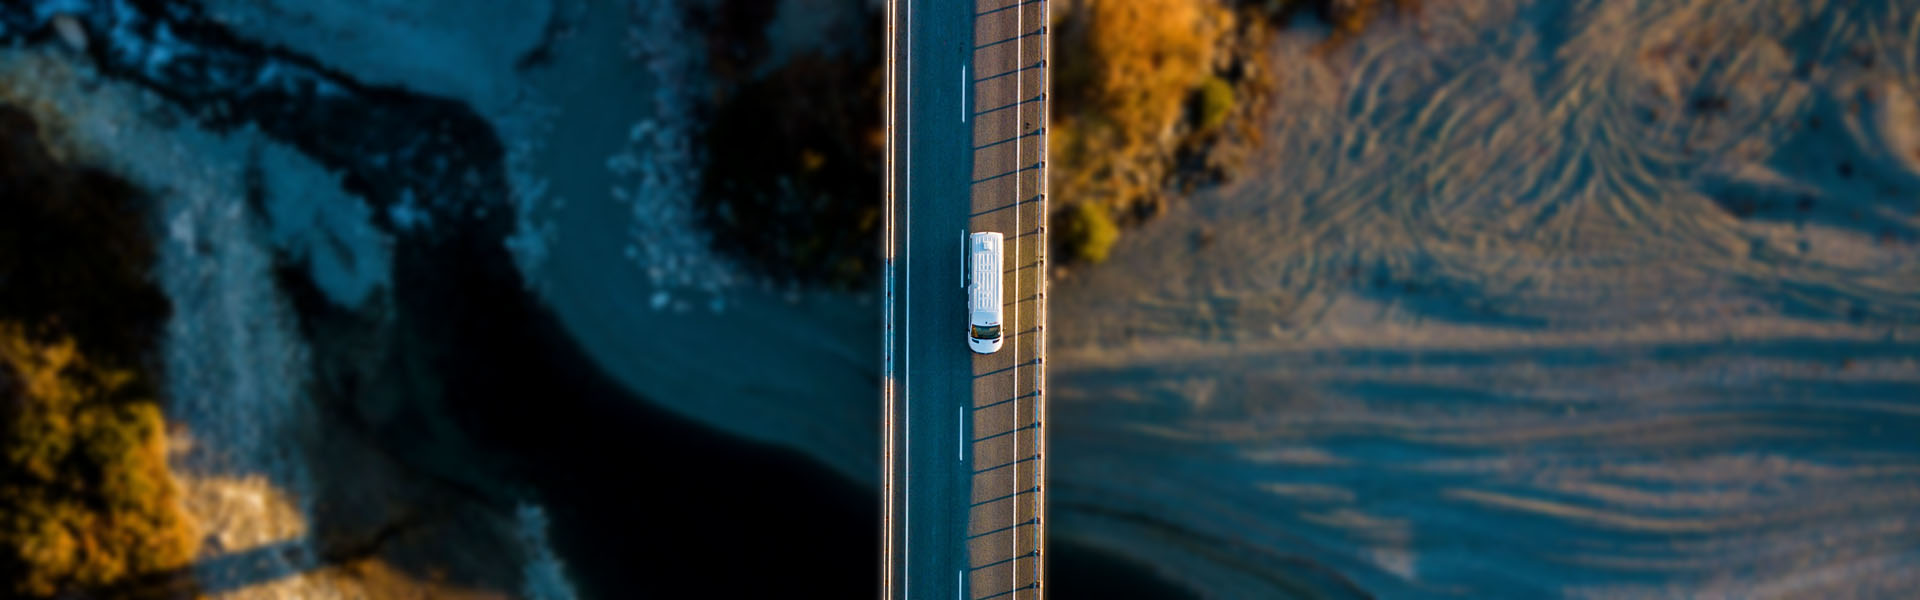 Drone image of Apollo rental campervan driving in New Zealand